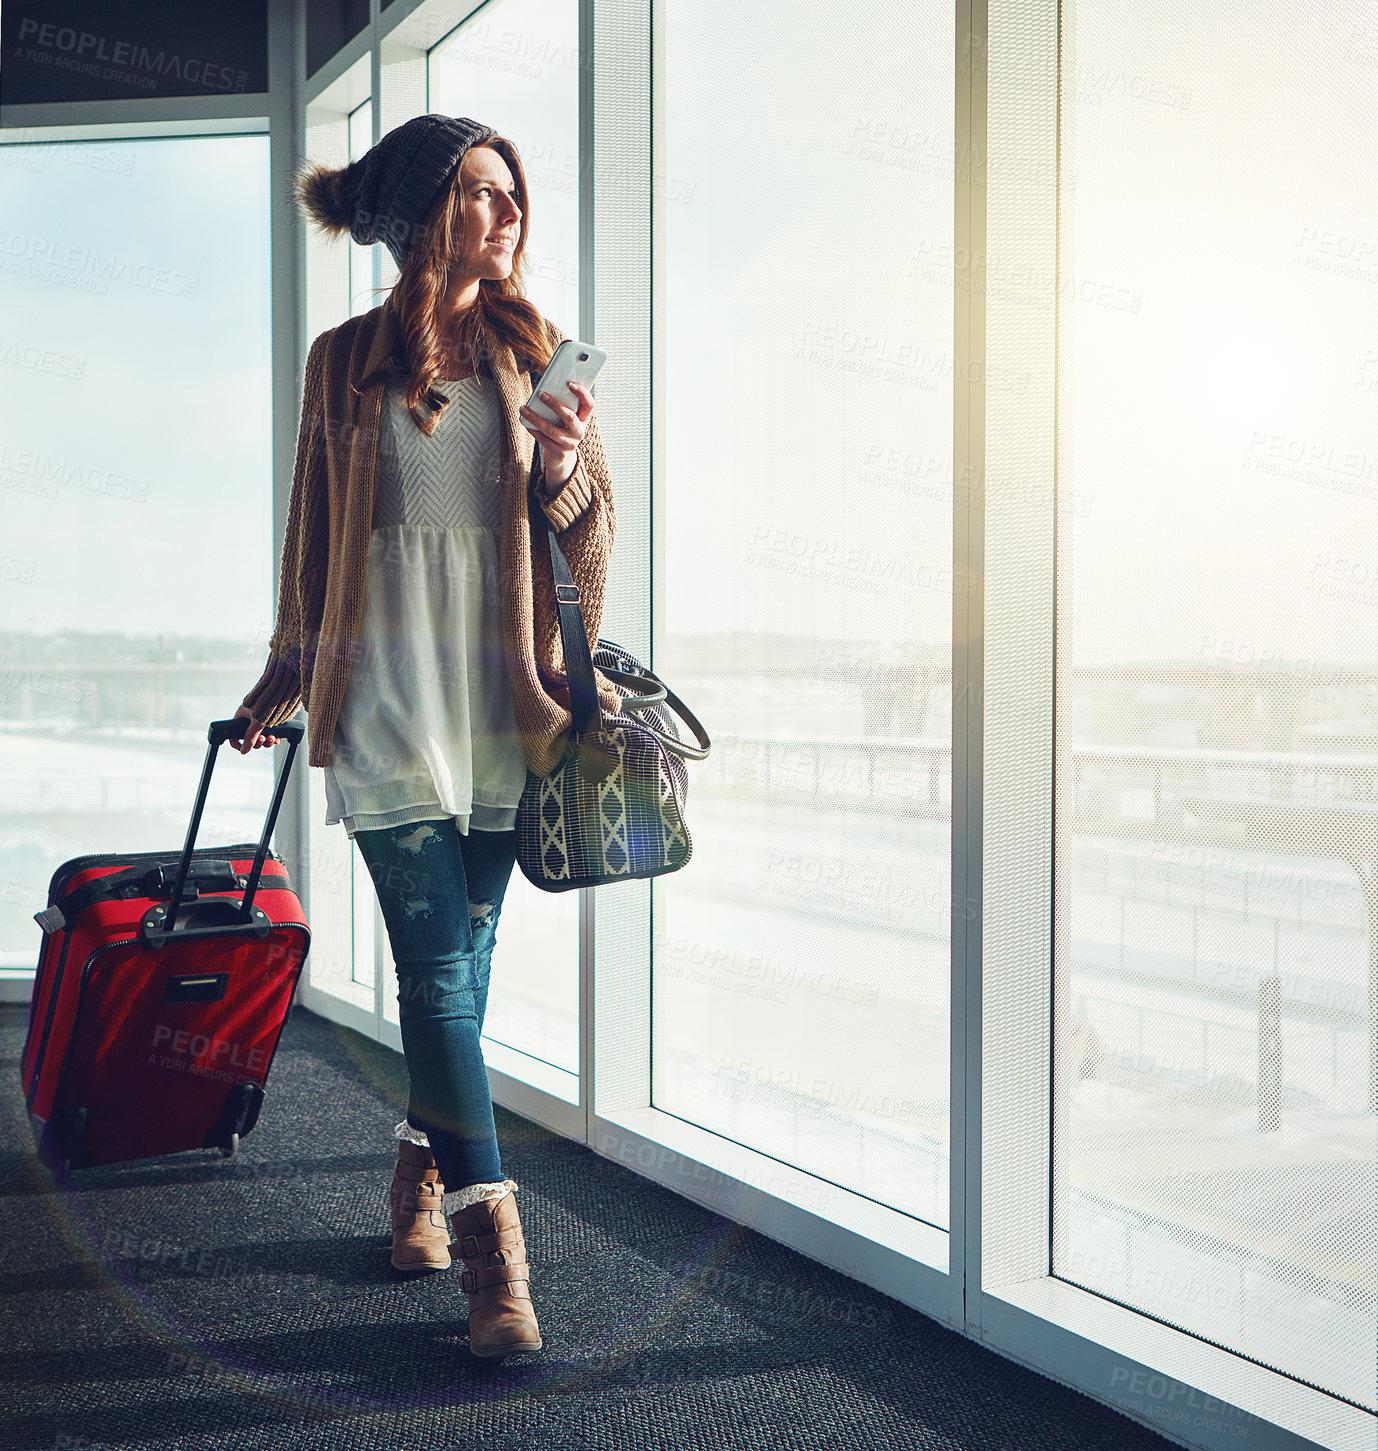 Buy stock photo Shot of a young woman standing at an airport with her luggage staring outside while holding her cellphone